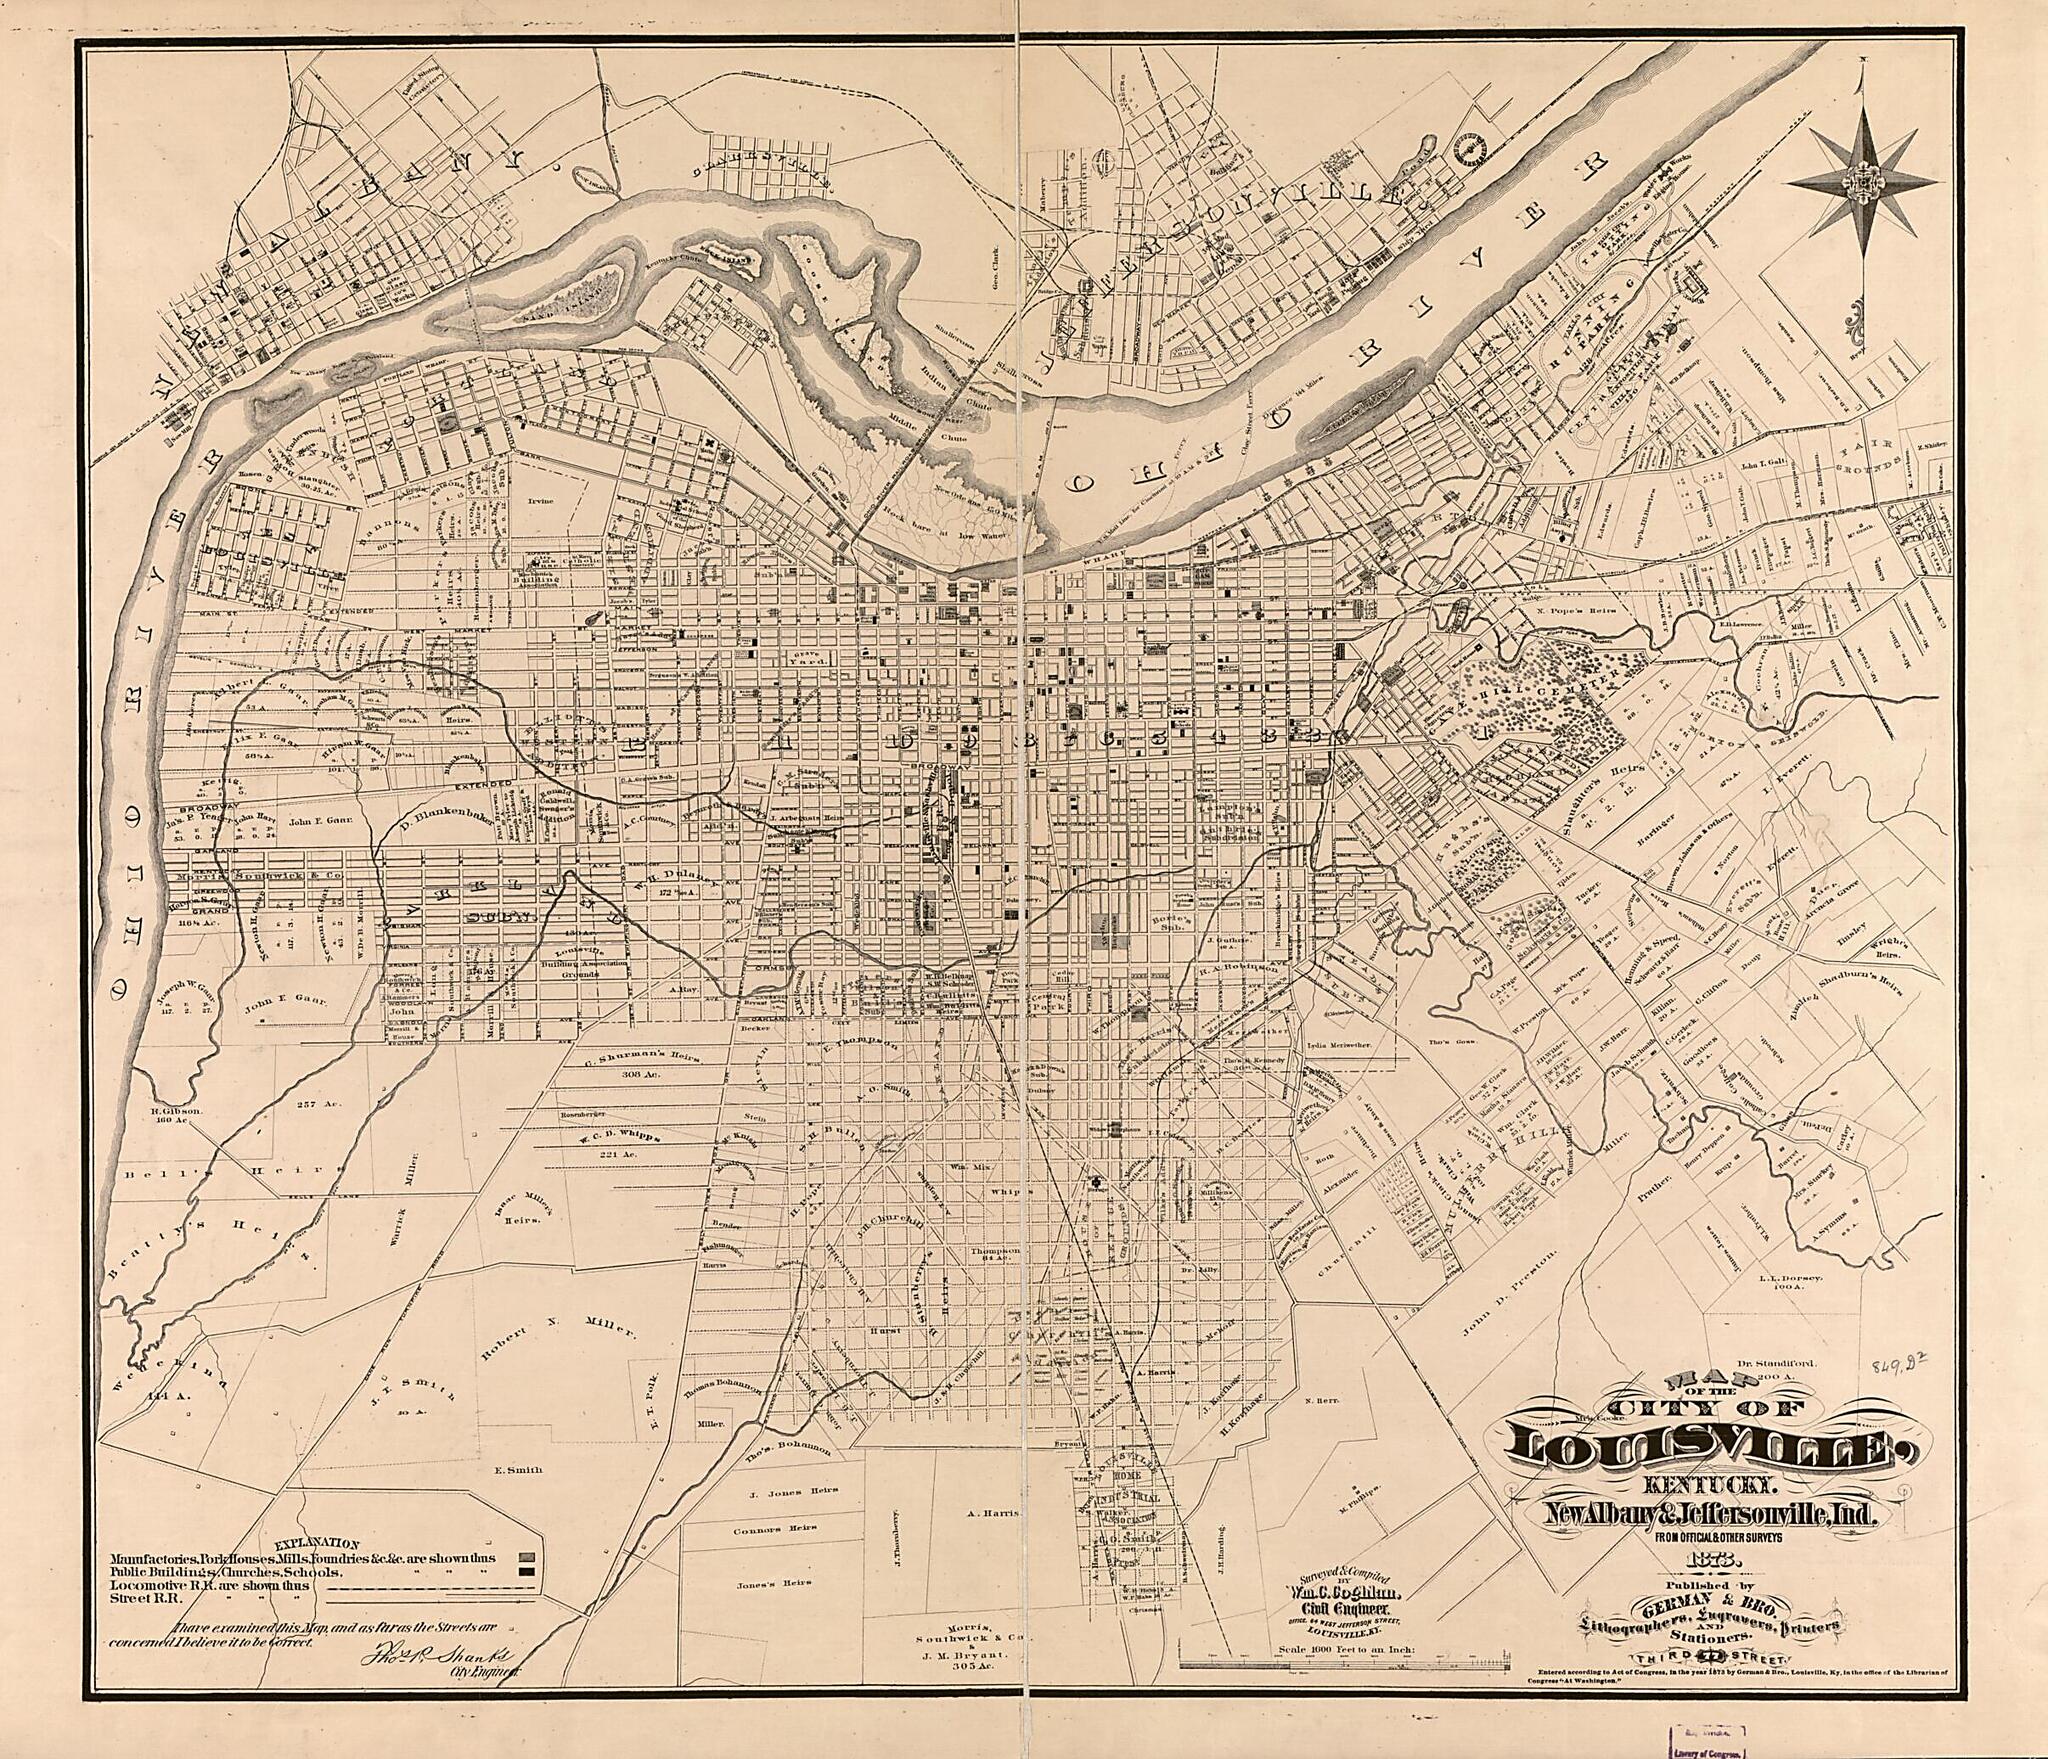 This old map of Map of the City of Louisville, Kentucky, New Albany &amp; Jeffersonville, Indiana : from Official and Other Surveys from 1873 was created by Wm. C. (William C.) Coghlan,  German &amp; Bro in 1873